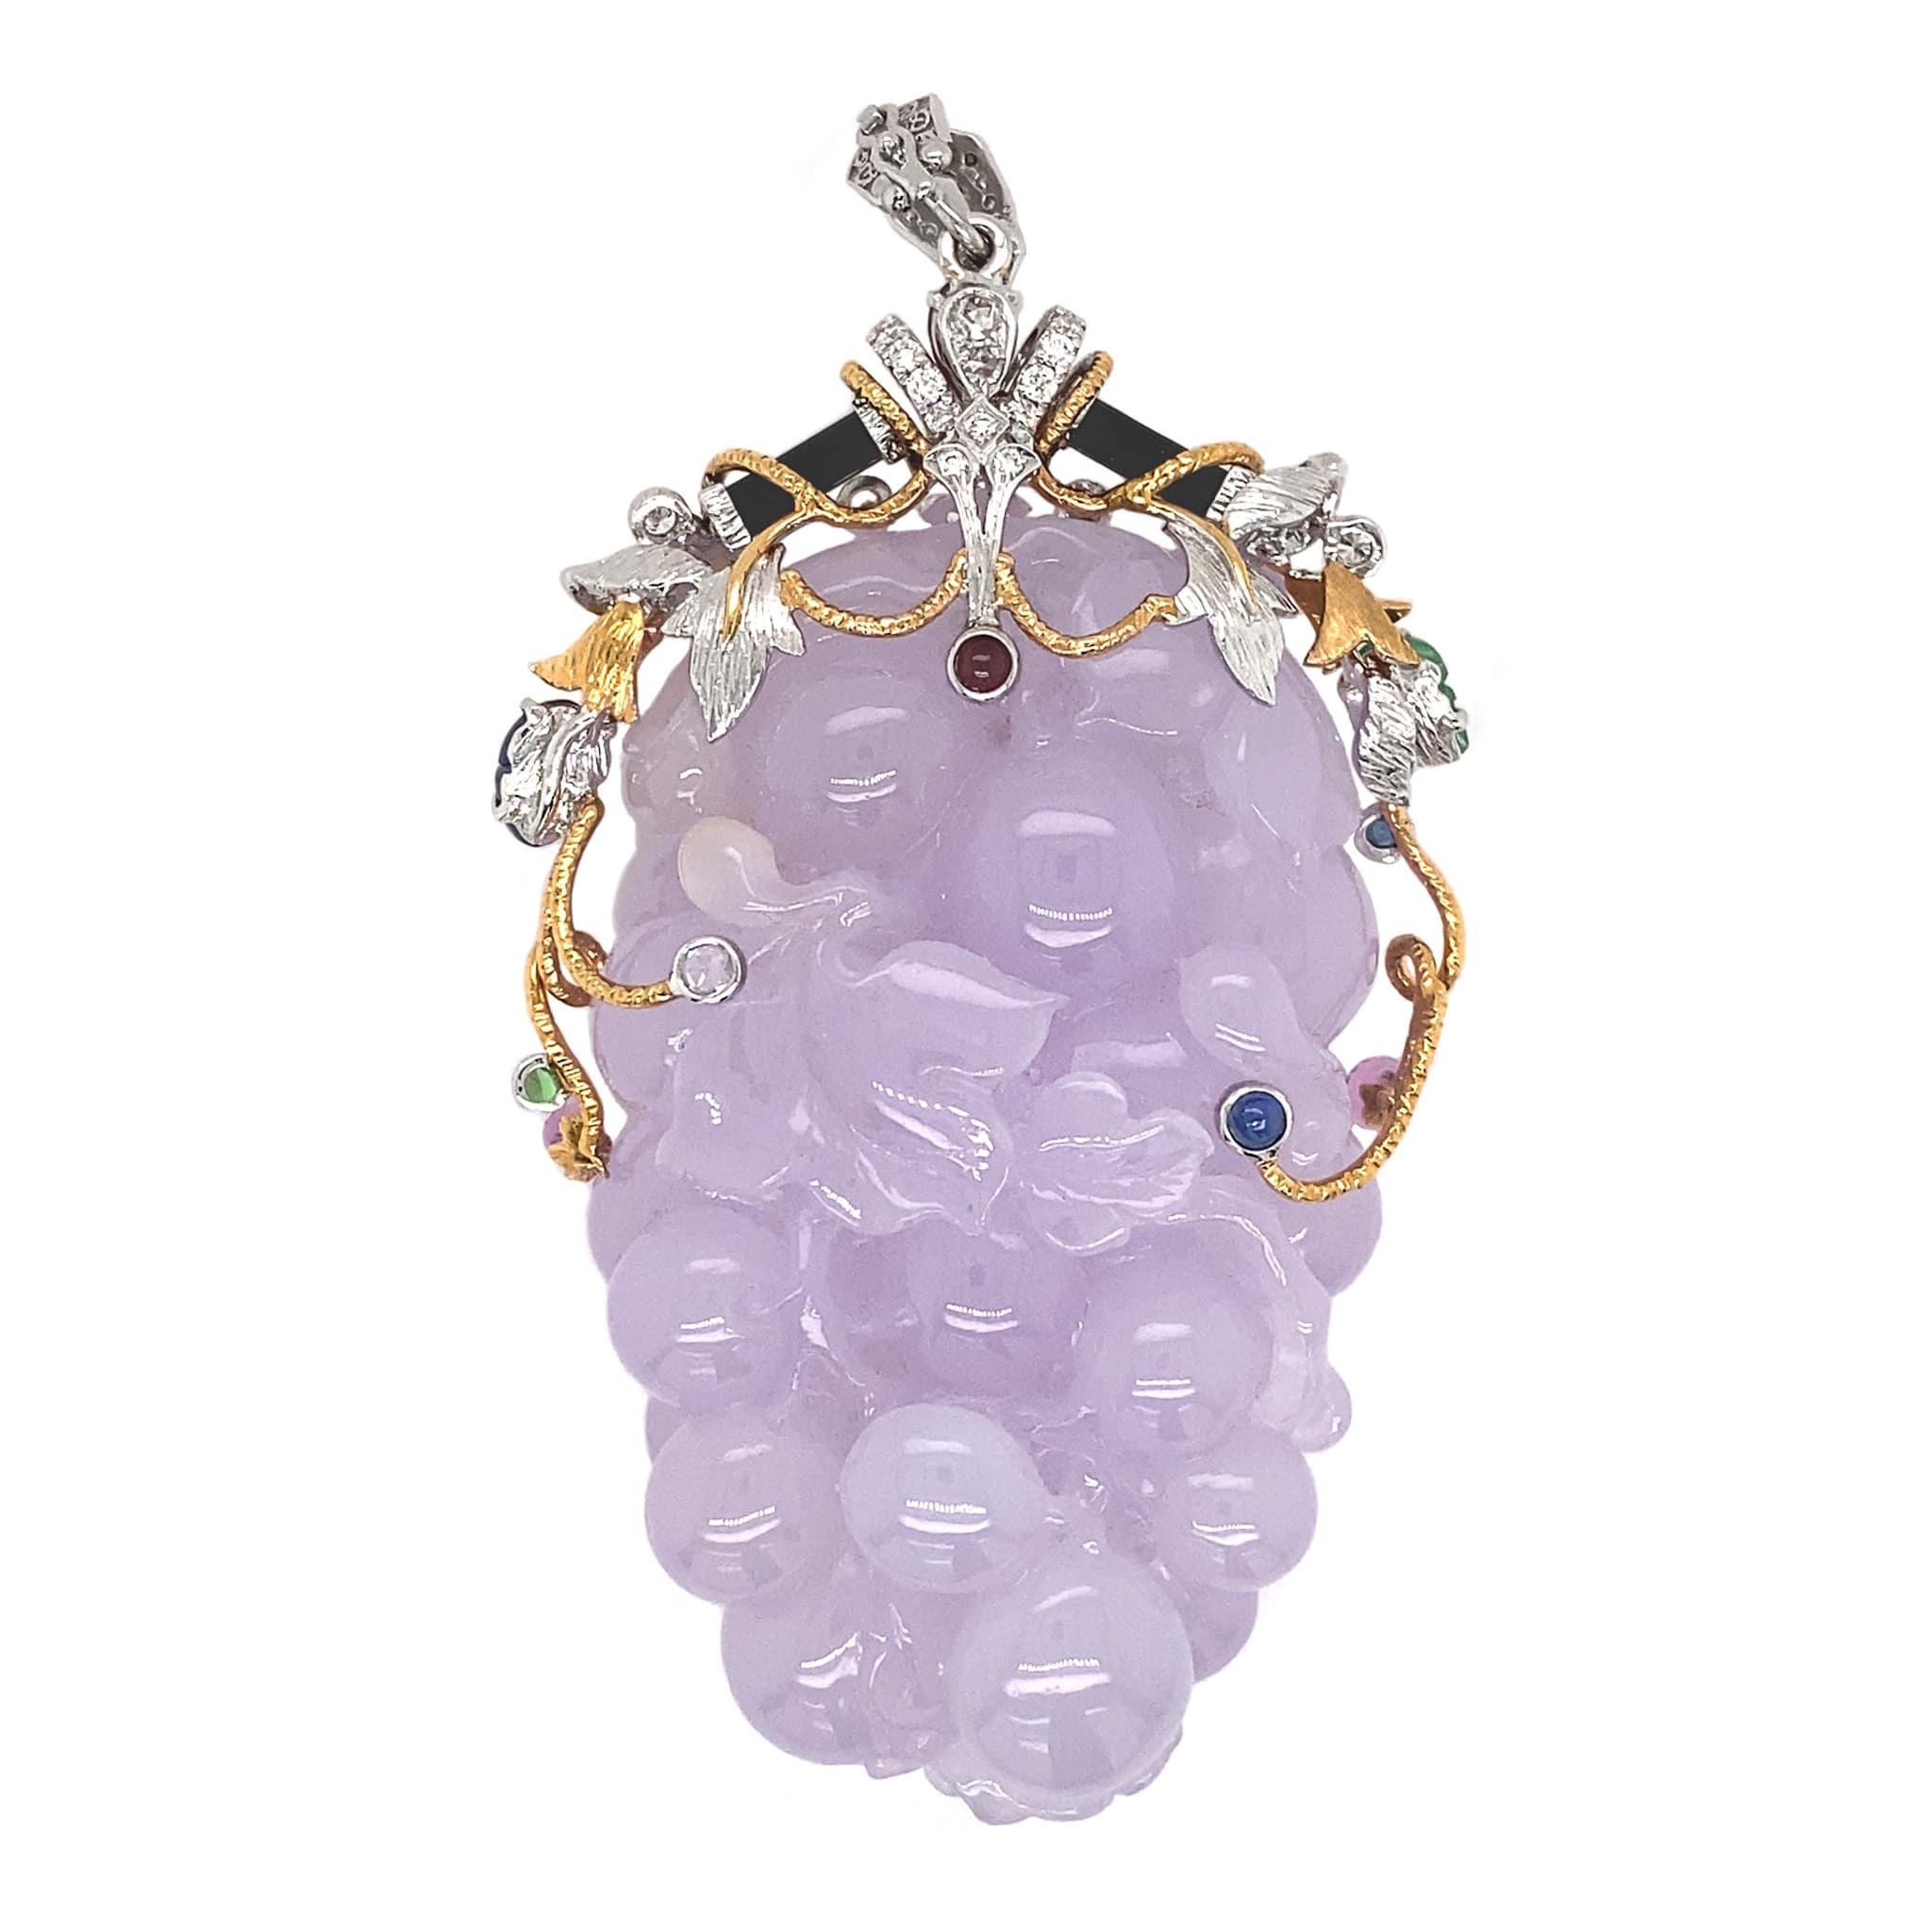 This significant lavender jade carving of the grape motif is the latest addition to Dilys’ rare jade collection. The icy lustre of this substantial piece of natural A-grade lavender jade certified by HKJSL*, weighing 268.50 carats, conveys the